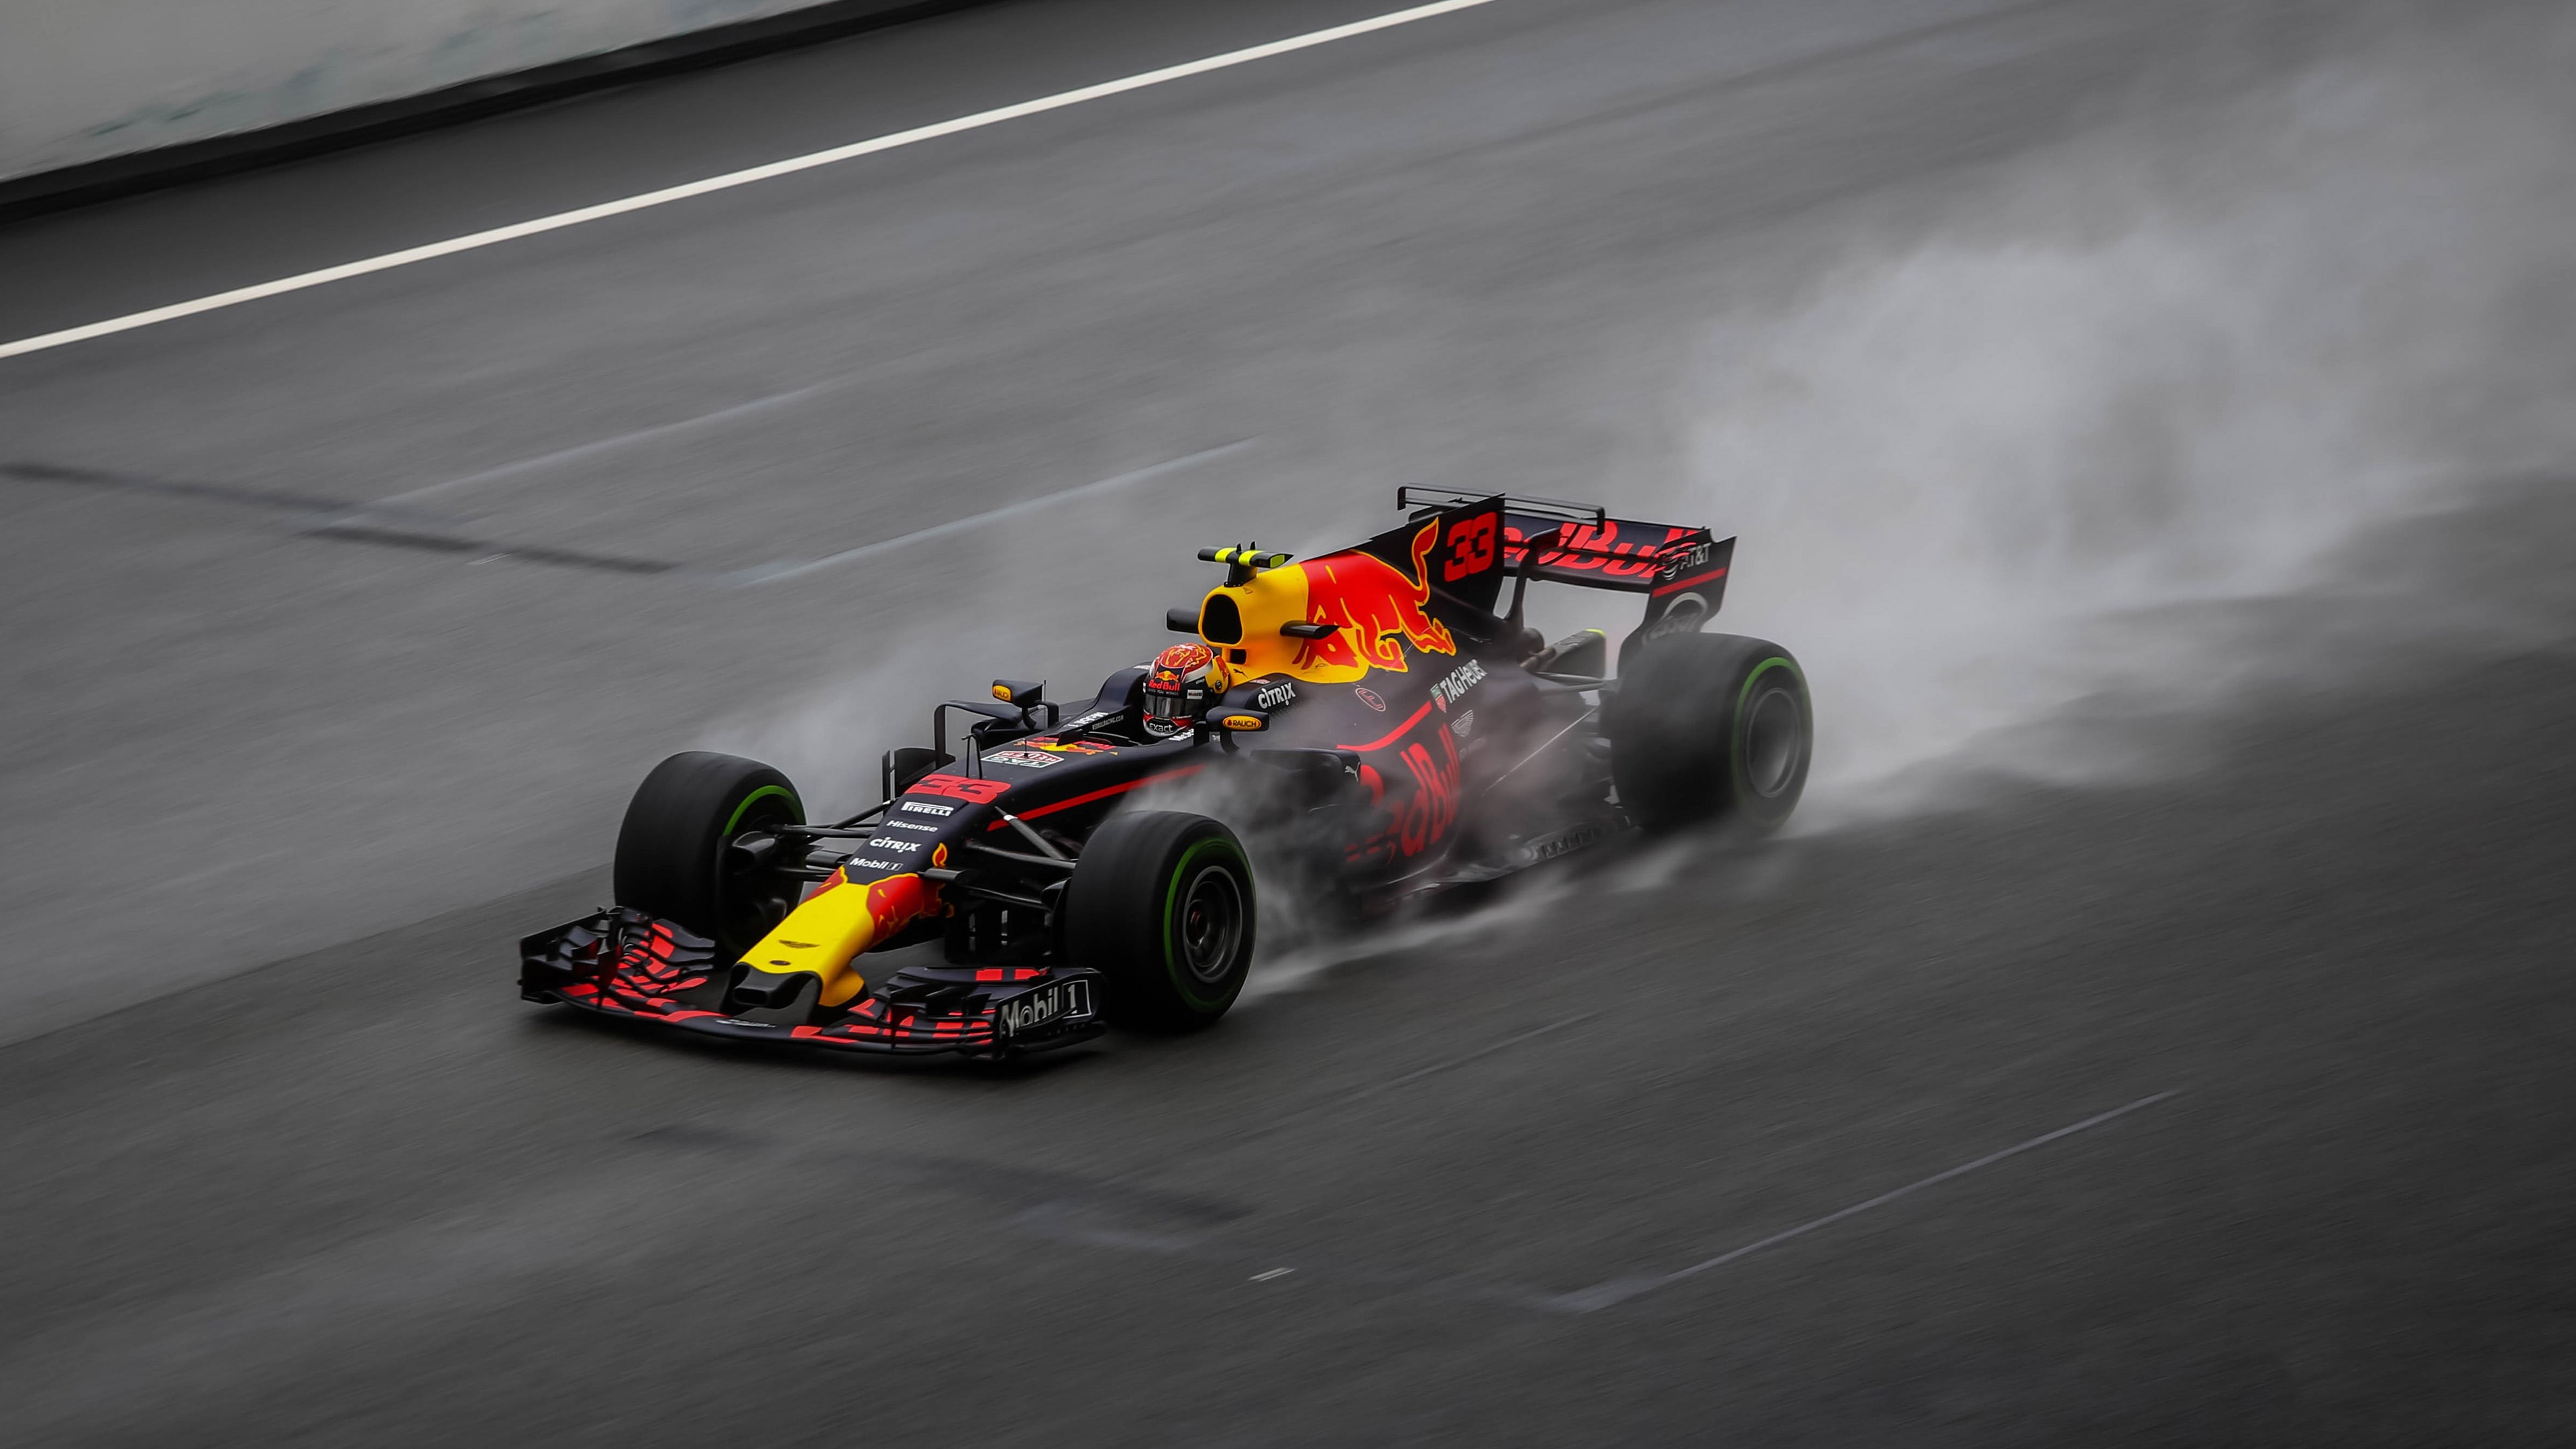 Red Bull Racing Wallpaper 71 Pictures